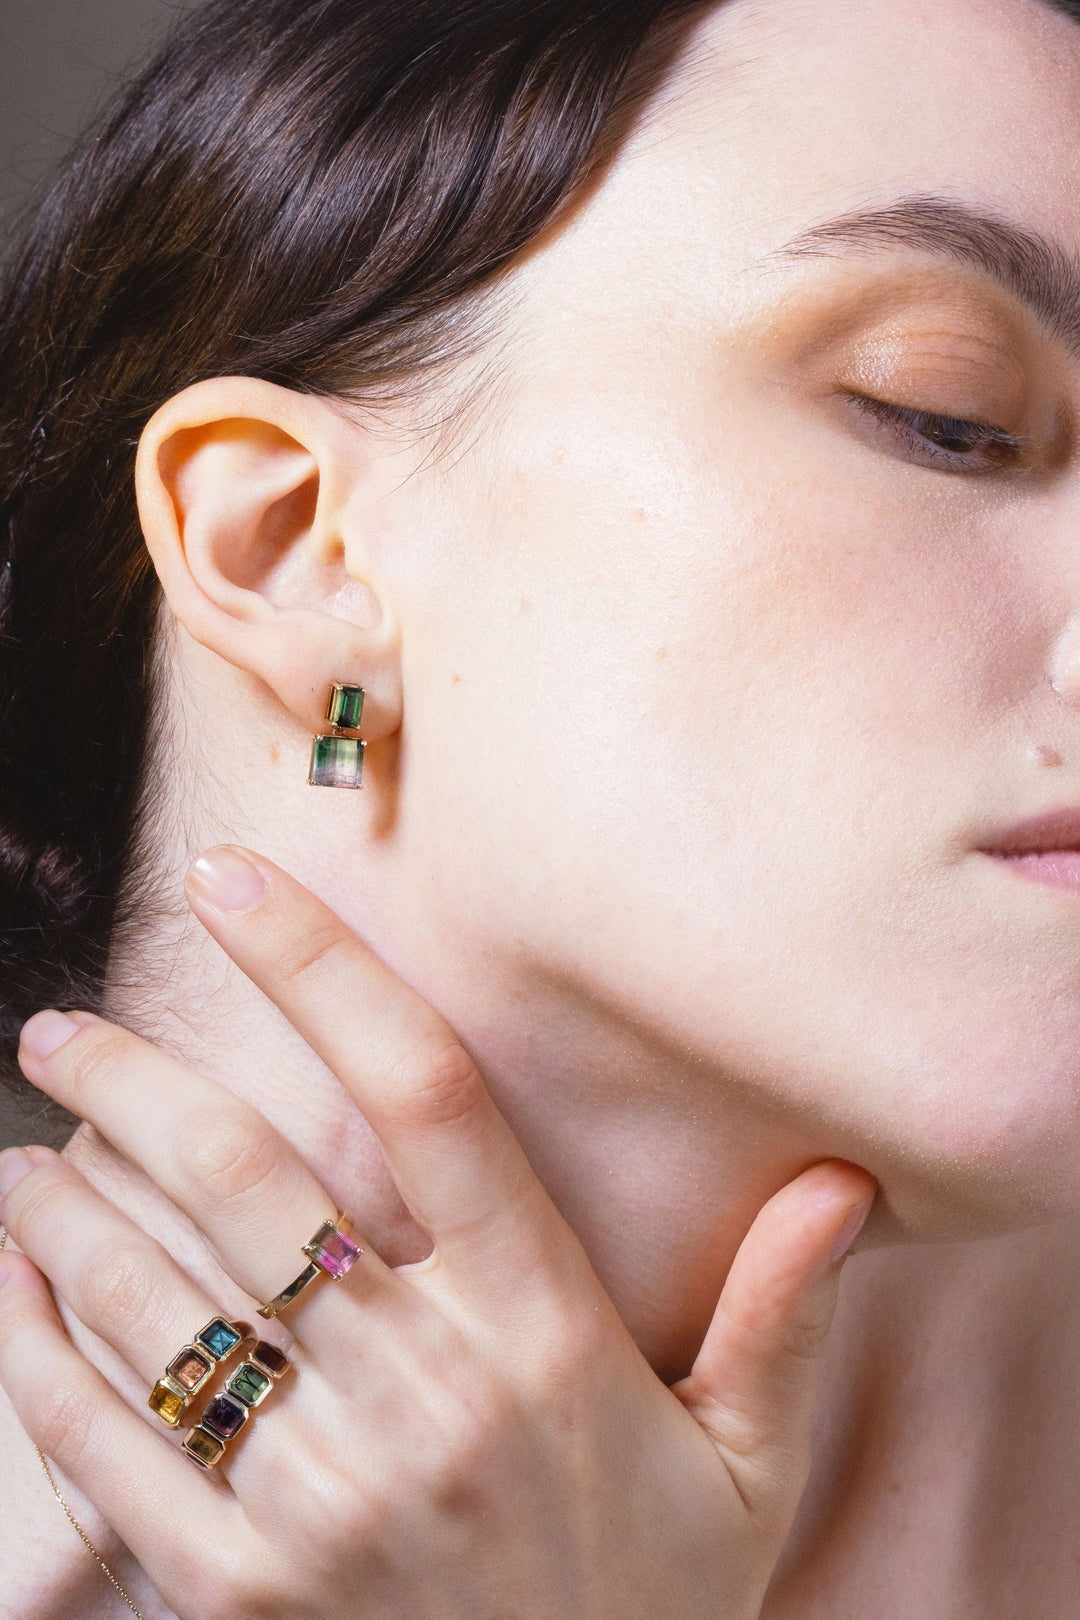 close up of womans hand and ear wearing genevieve schwartz jewellery colourful gemstone pieces. Eye is part closed.